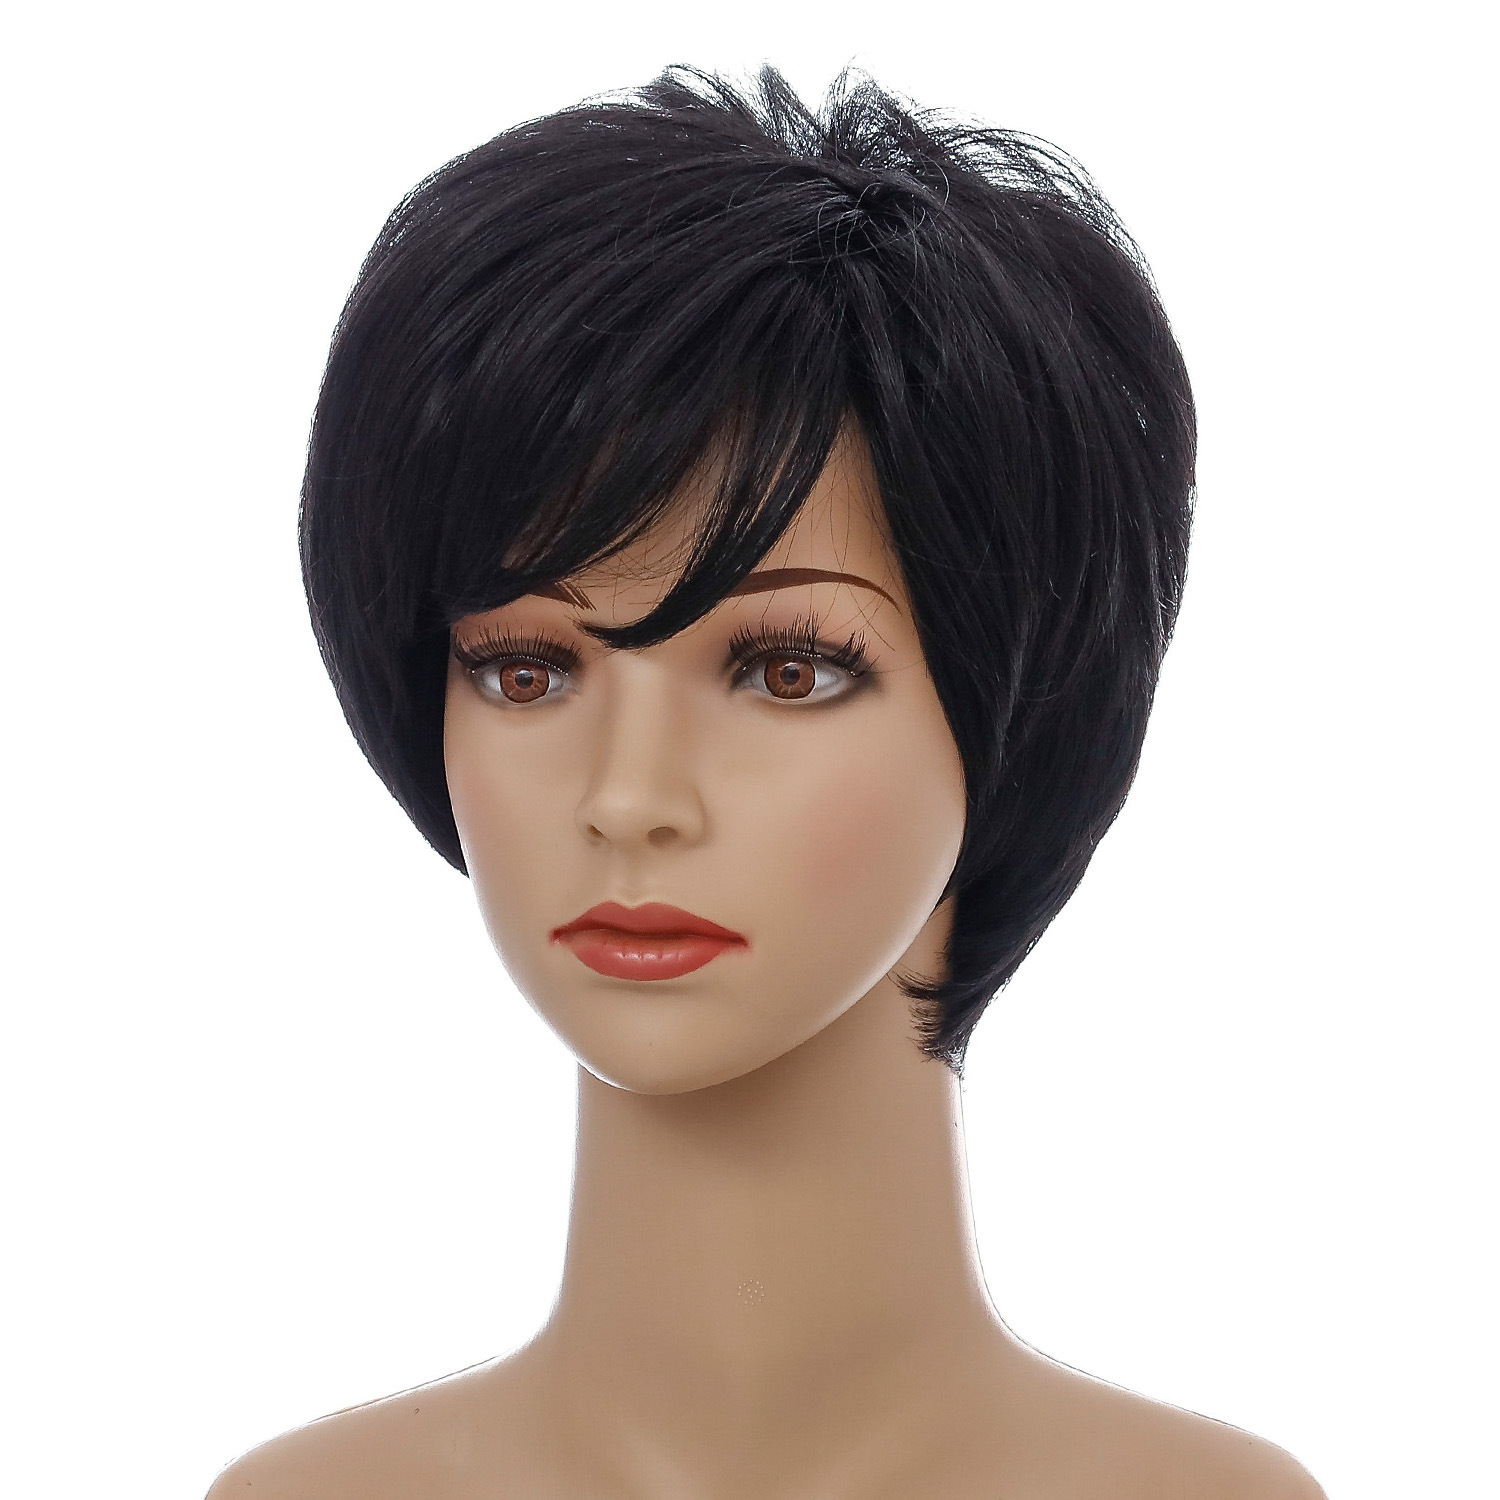 Fashionable black synthetic wig with short straight hair, perfect for women